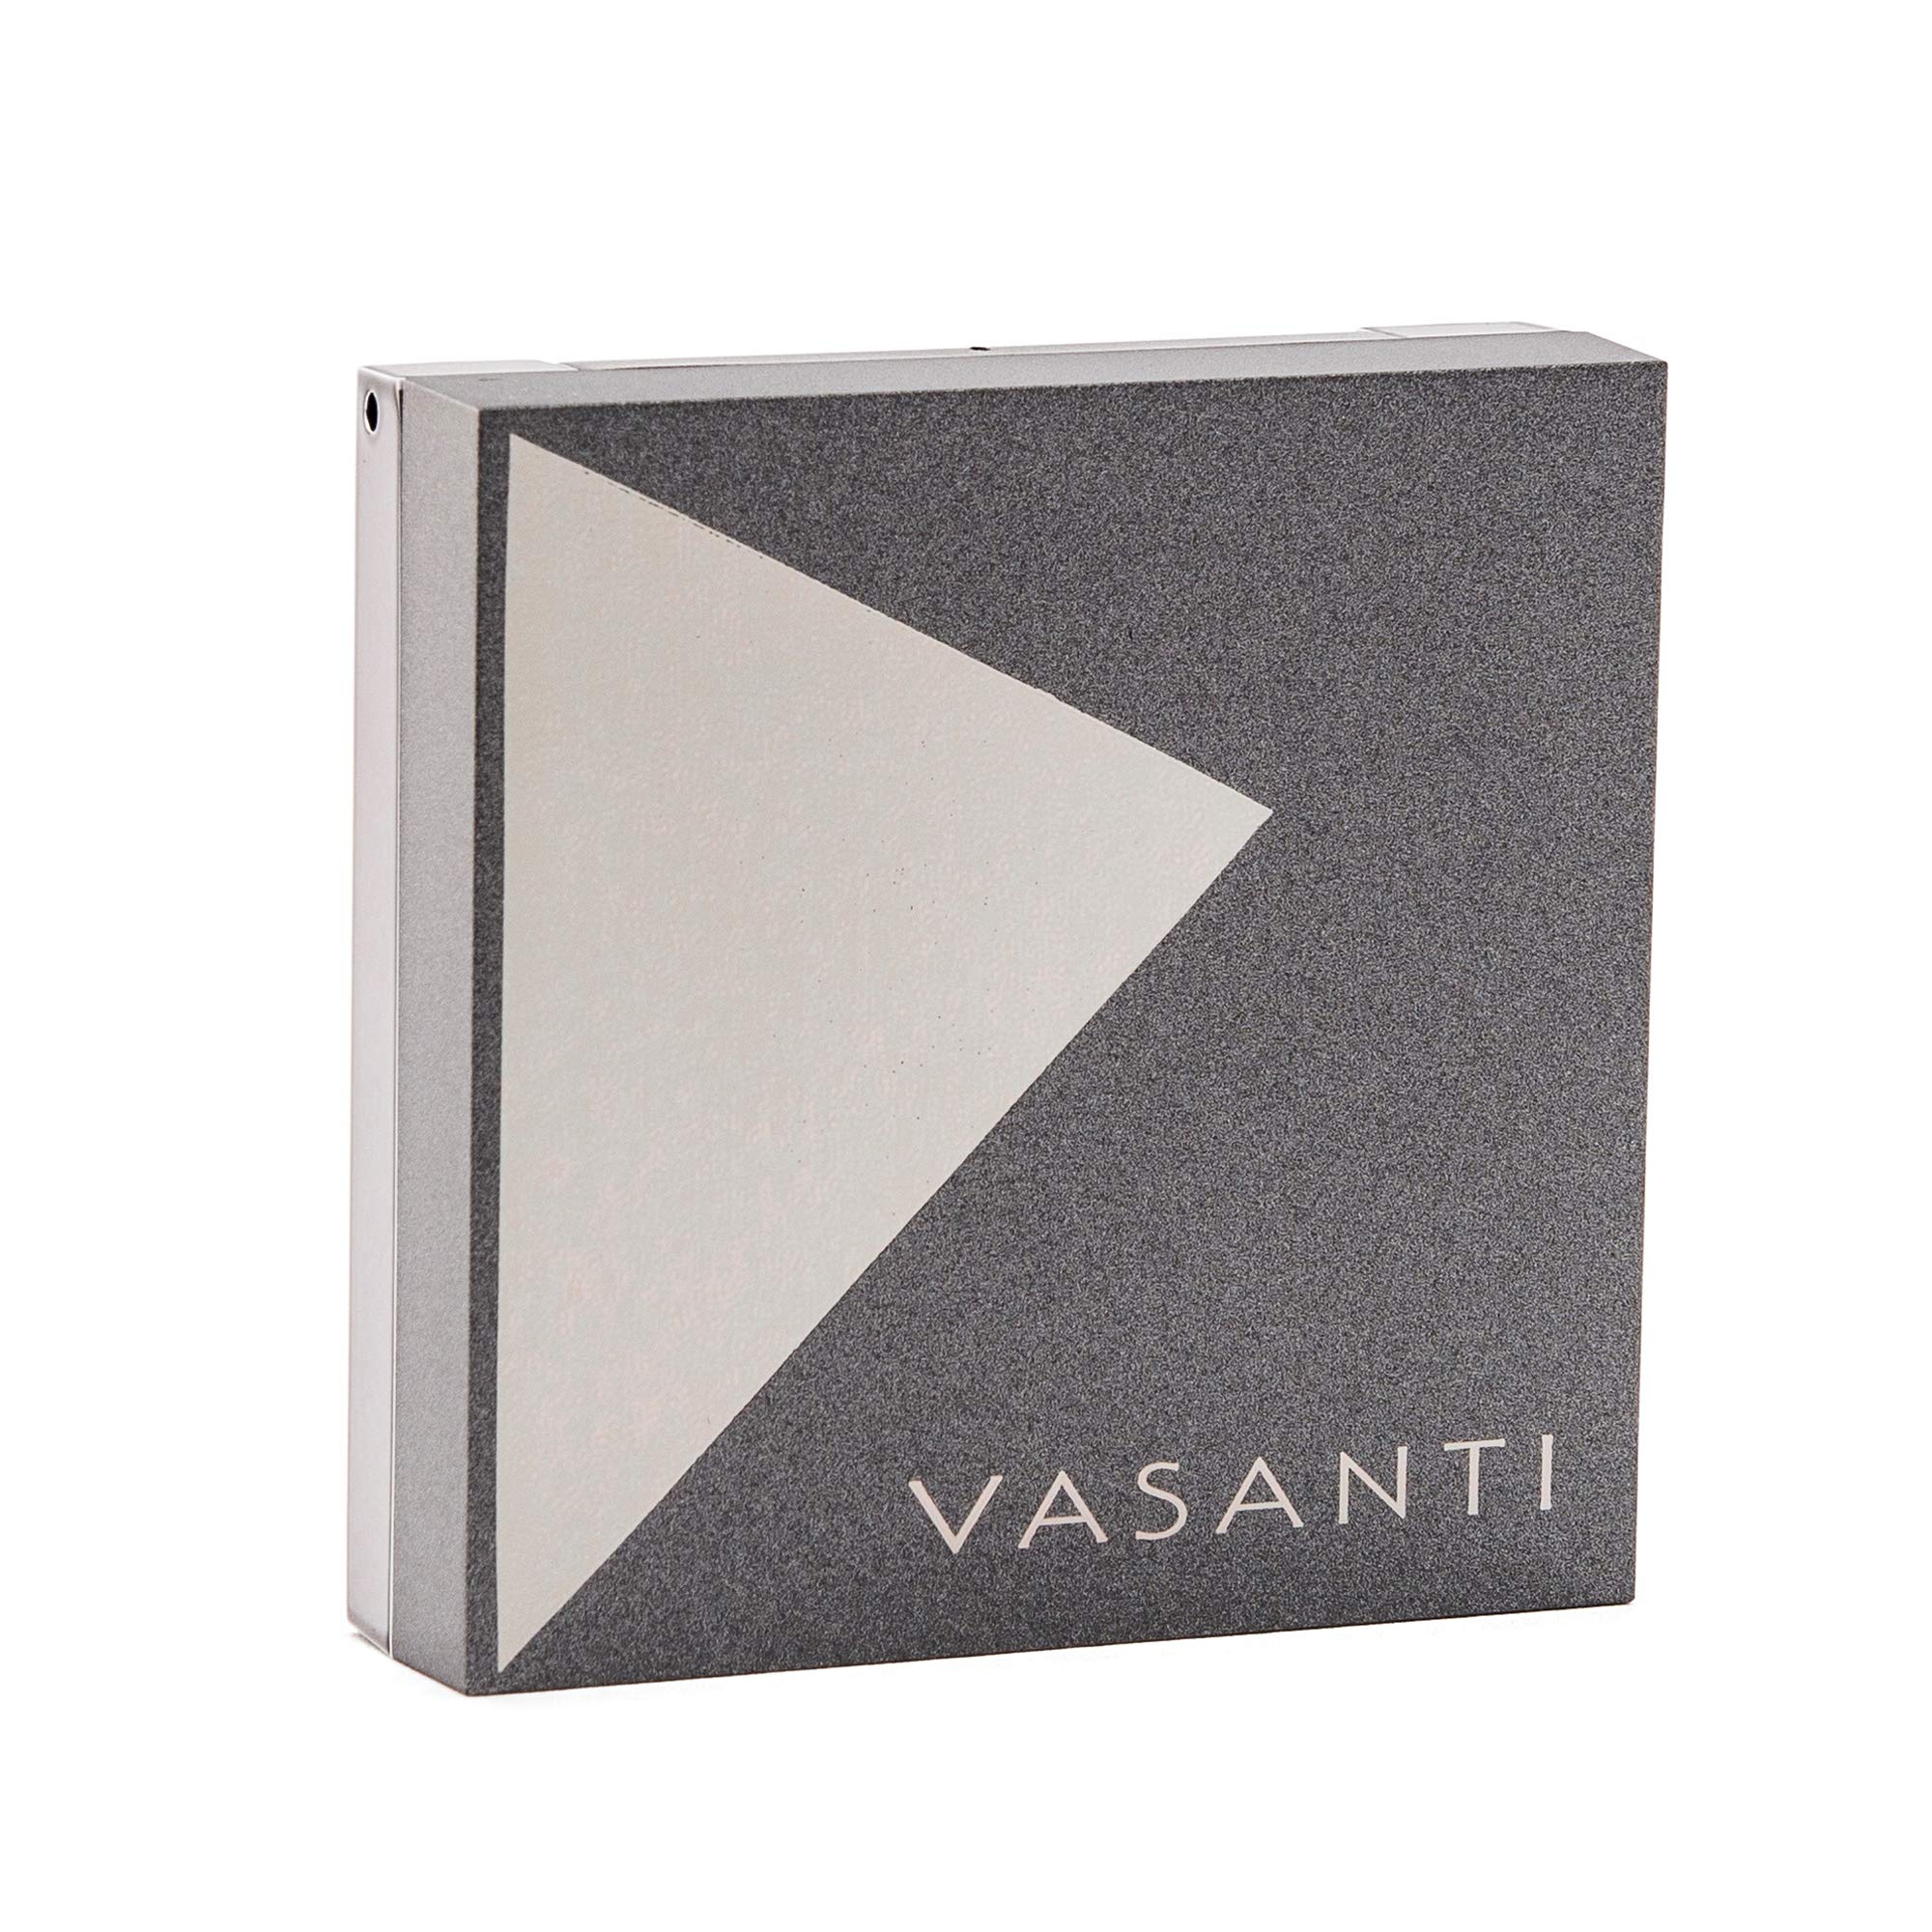 VASANTI Bloom Mineral Blush (Lotus - Golden Pink) - High Pigmented Cruelty Free Soft Highly Blendable Face Cheeks Blush Powder